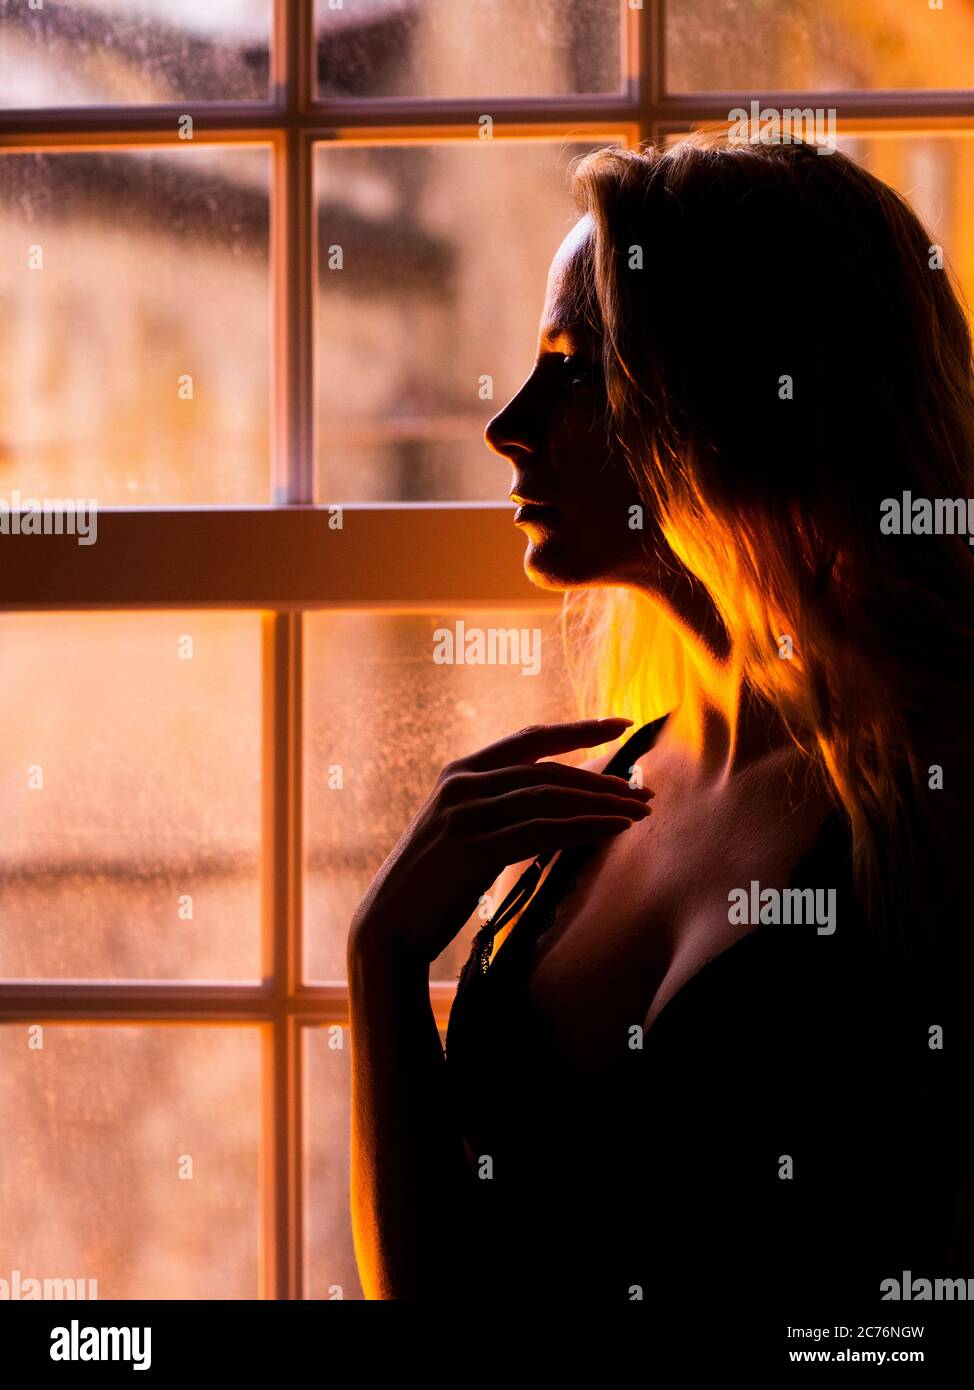 woman with long hair standing by a window at night Stock Photo